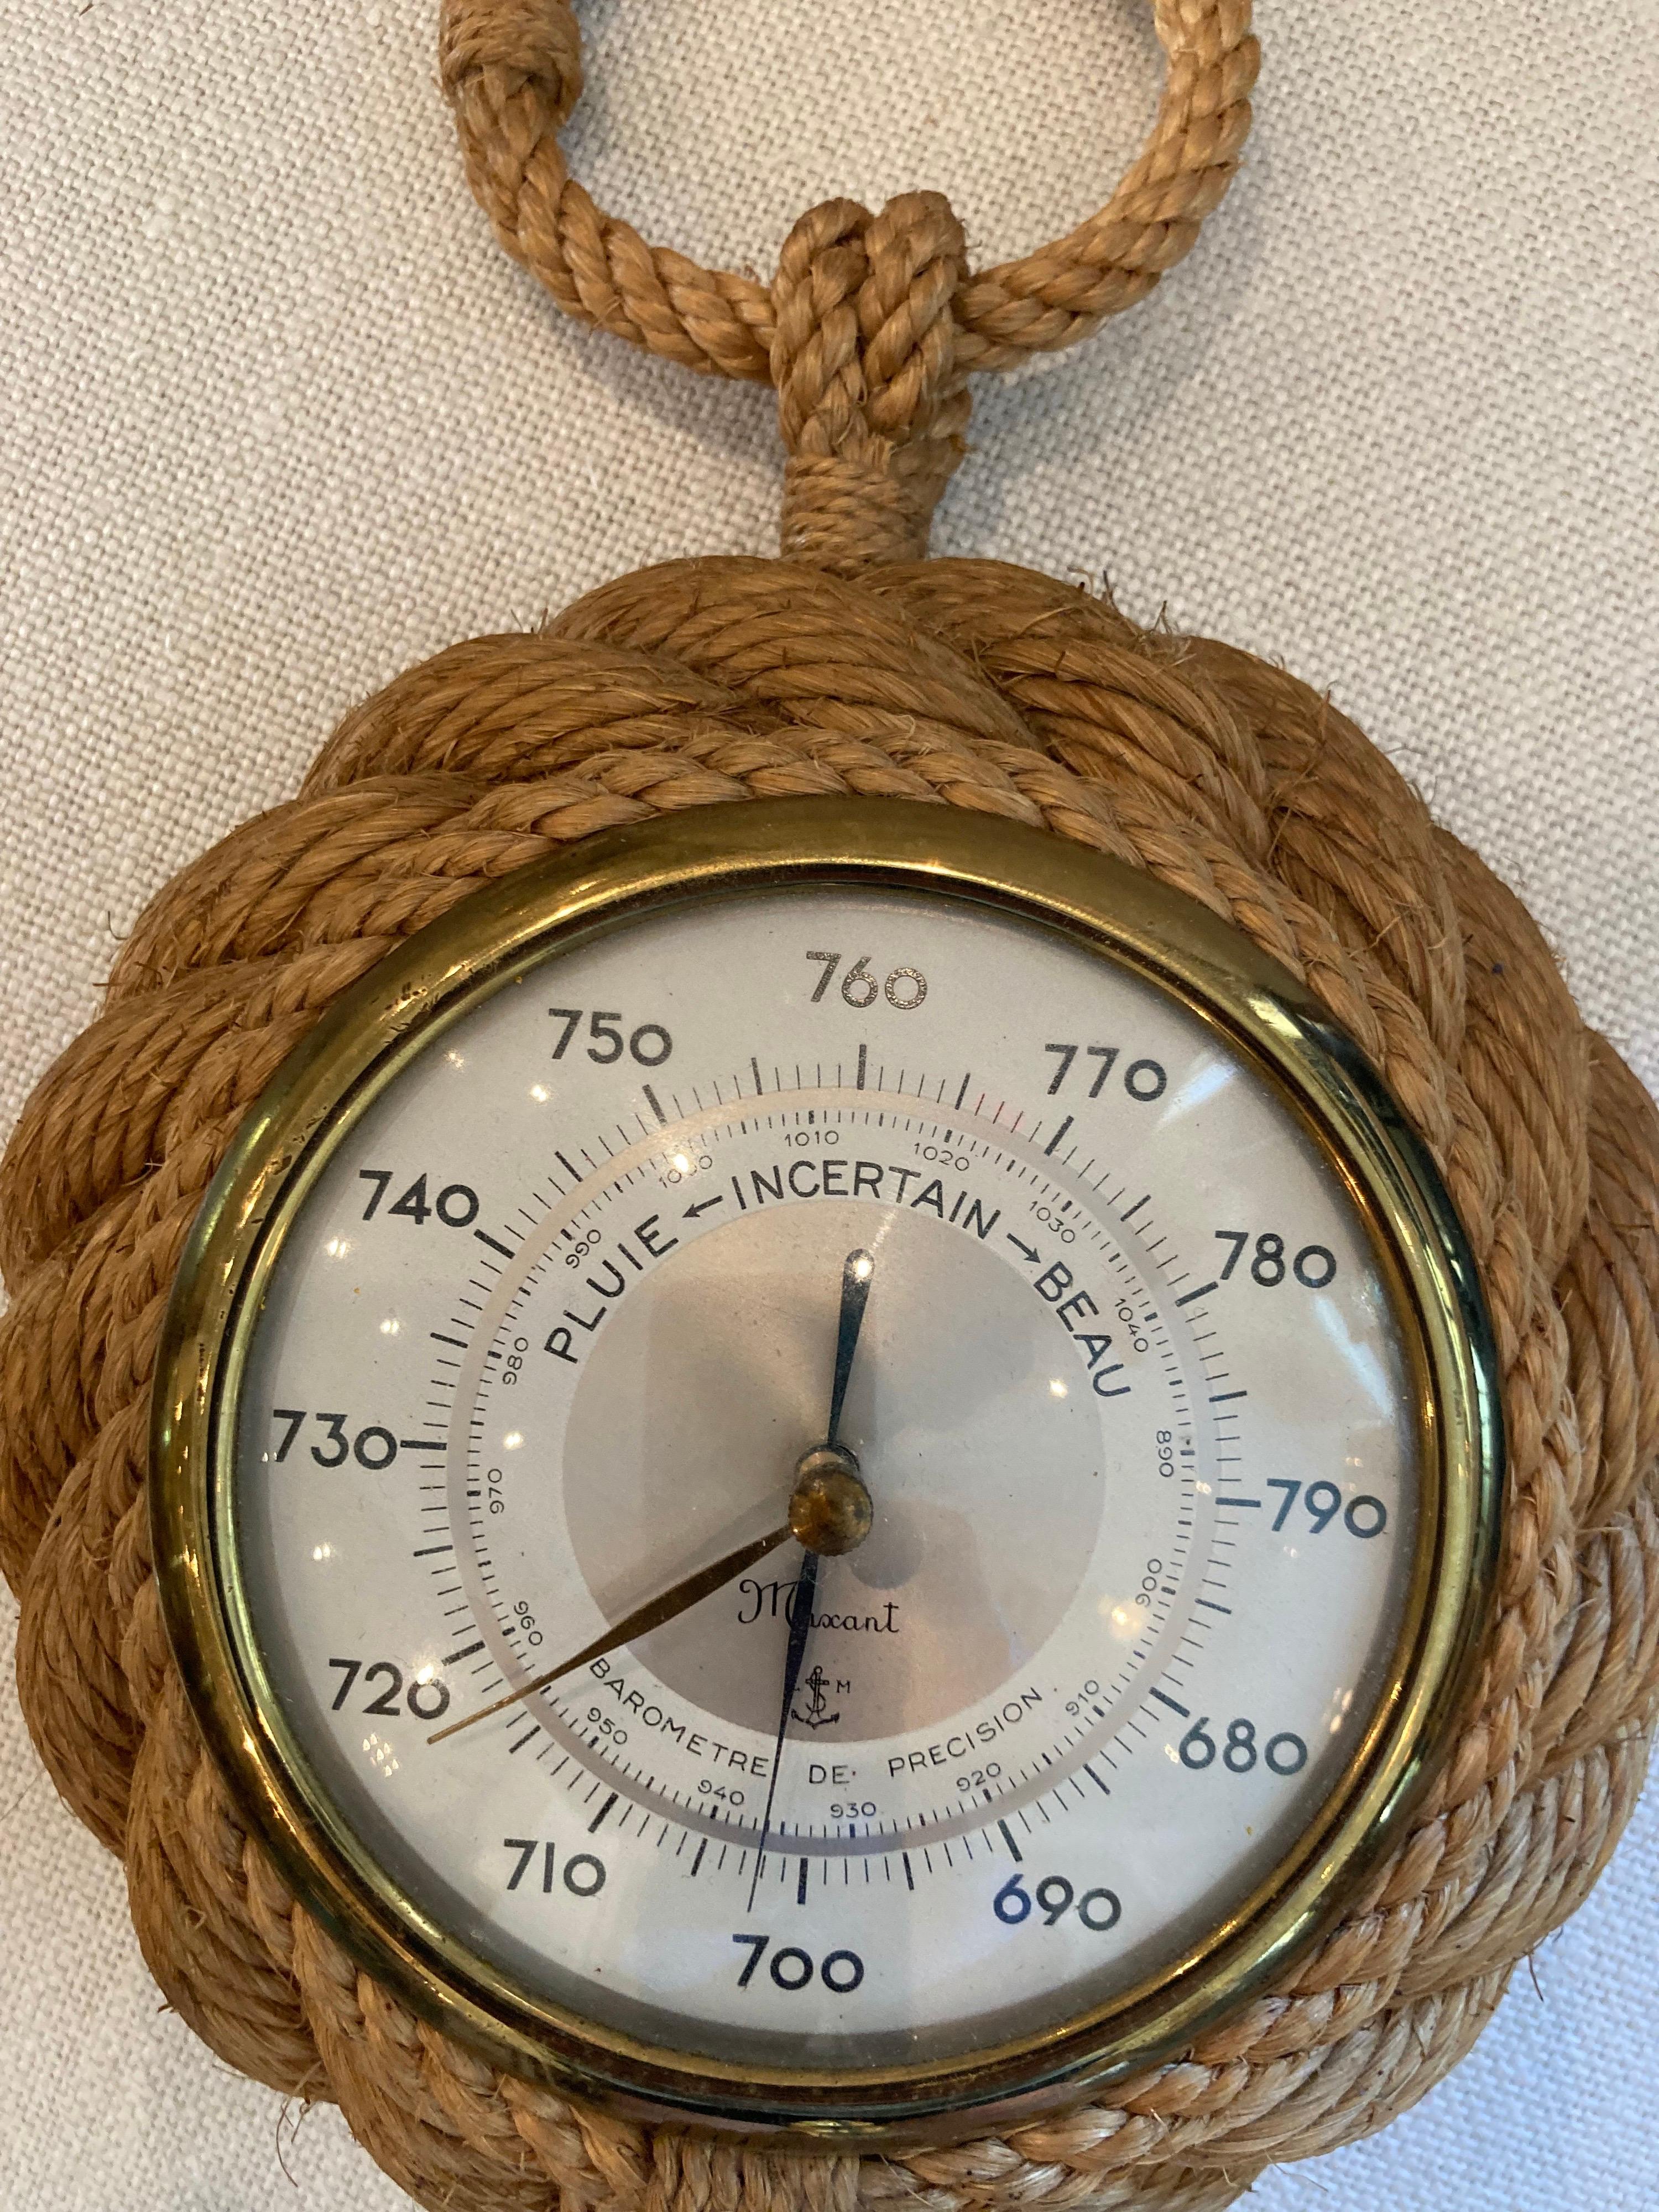 Interesting barometer in the nautical style by Audoux Minet.....